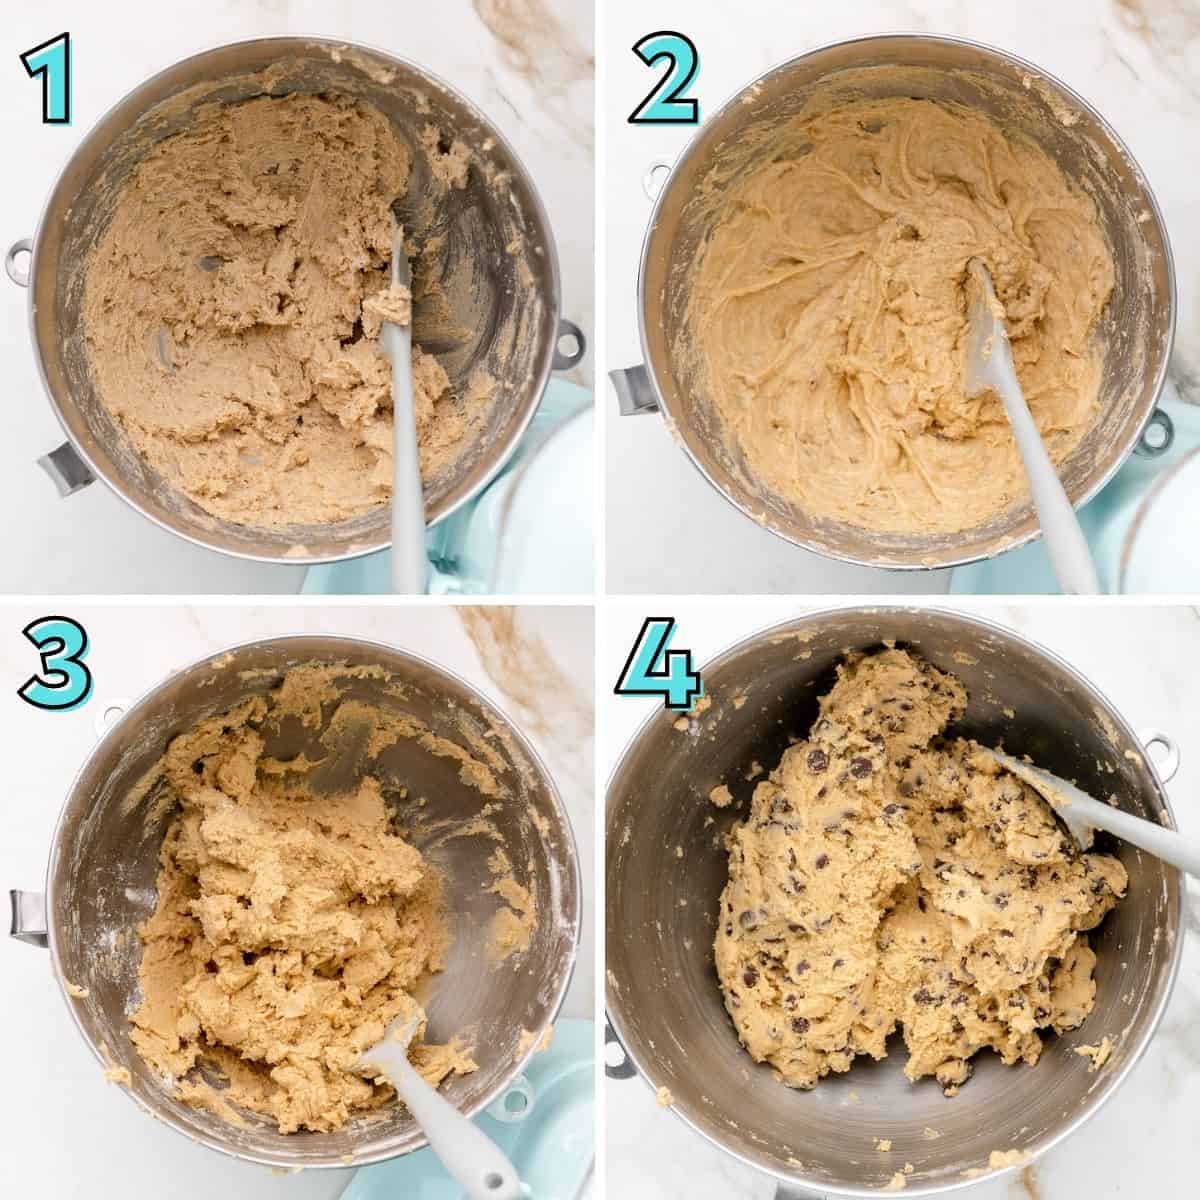 Step by step instructions to prepare chocolate chip skillet cookie, in a collage.